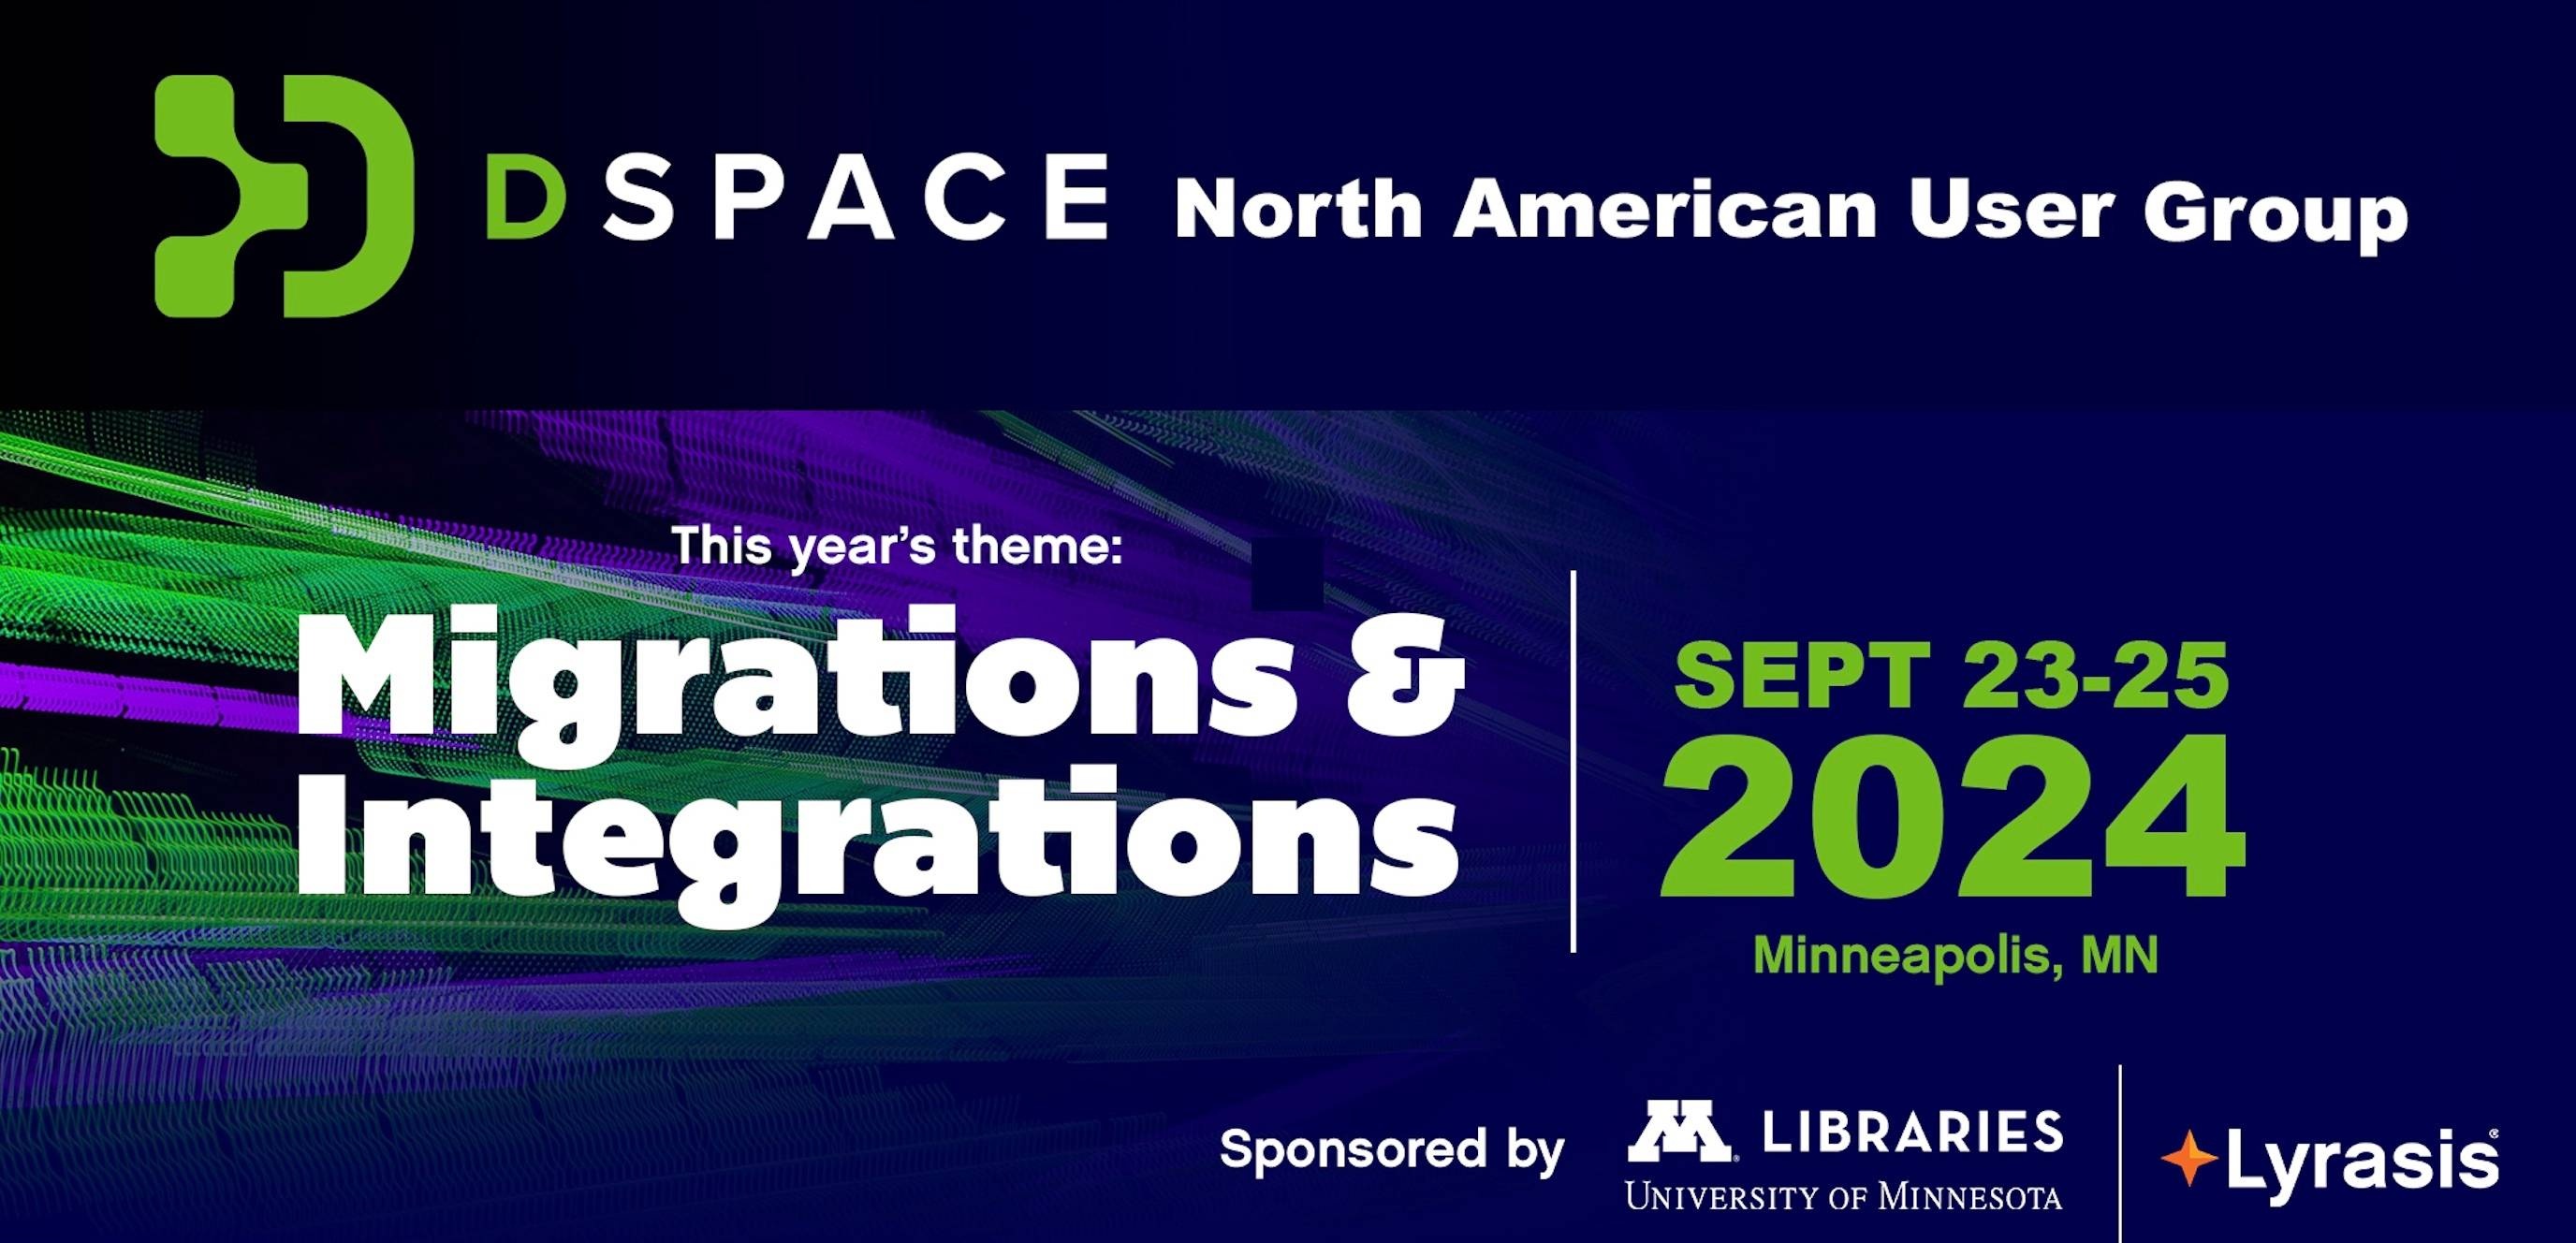 DSpace North American User Group September 23-25, 2024